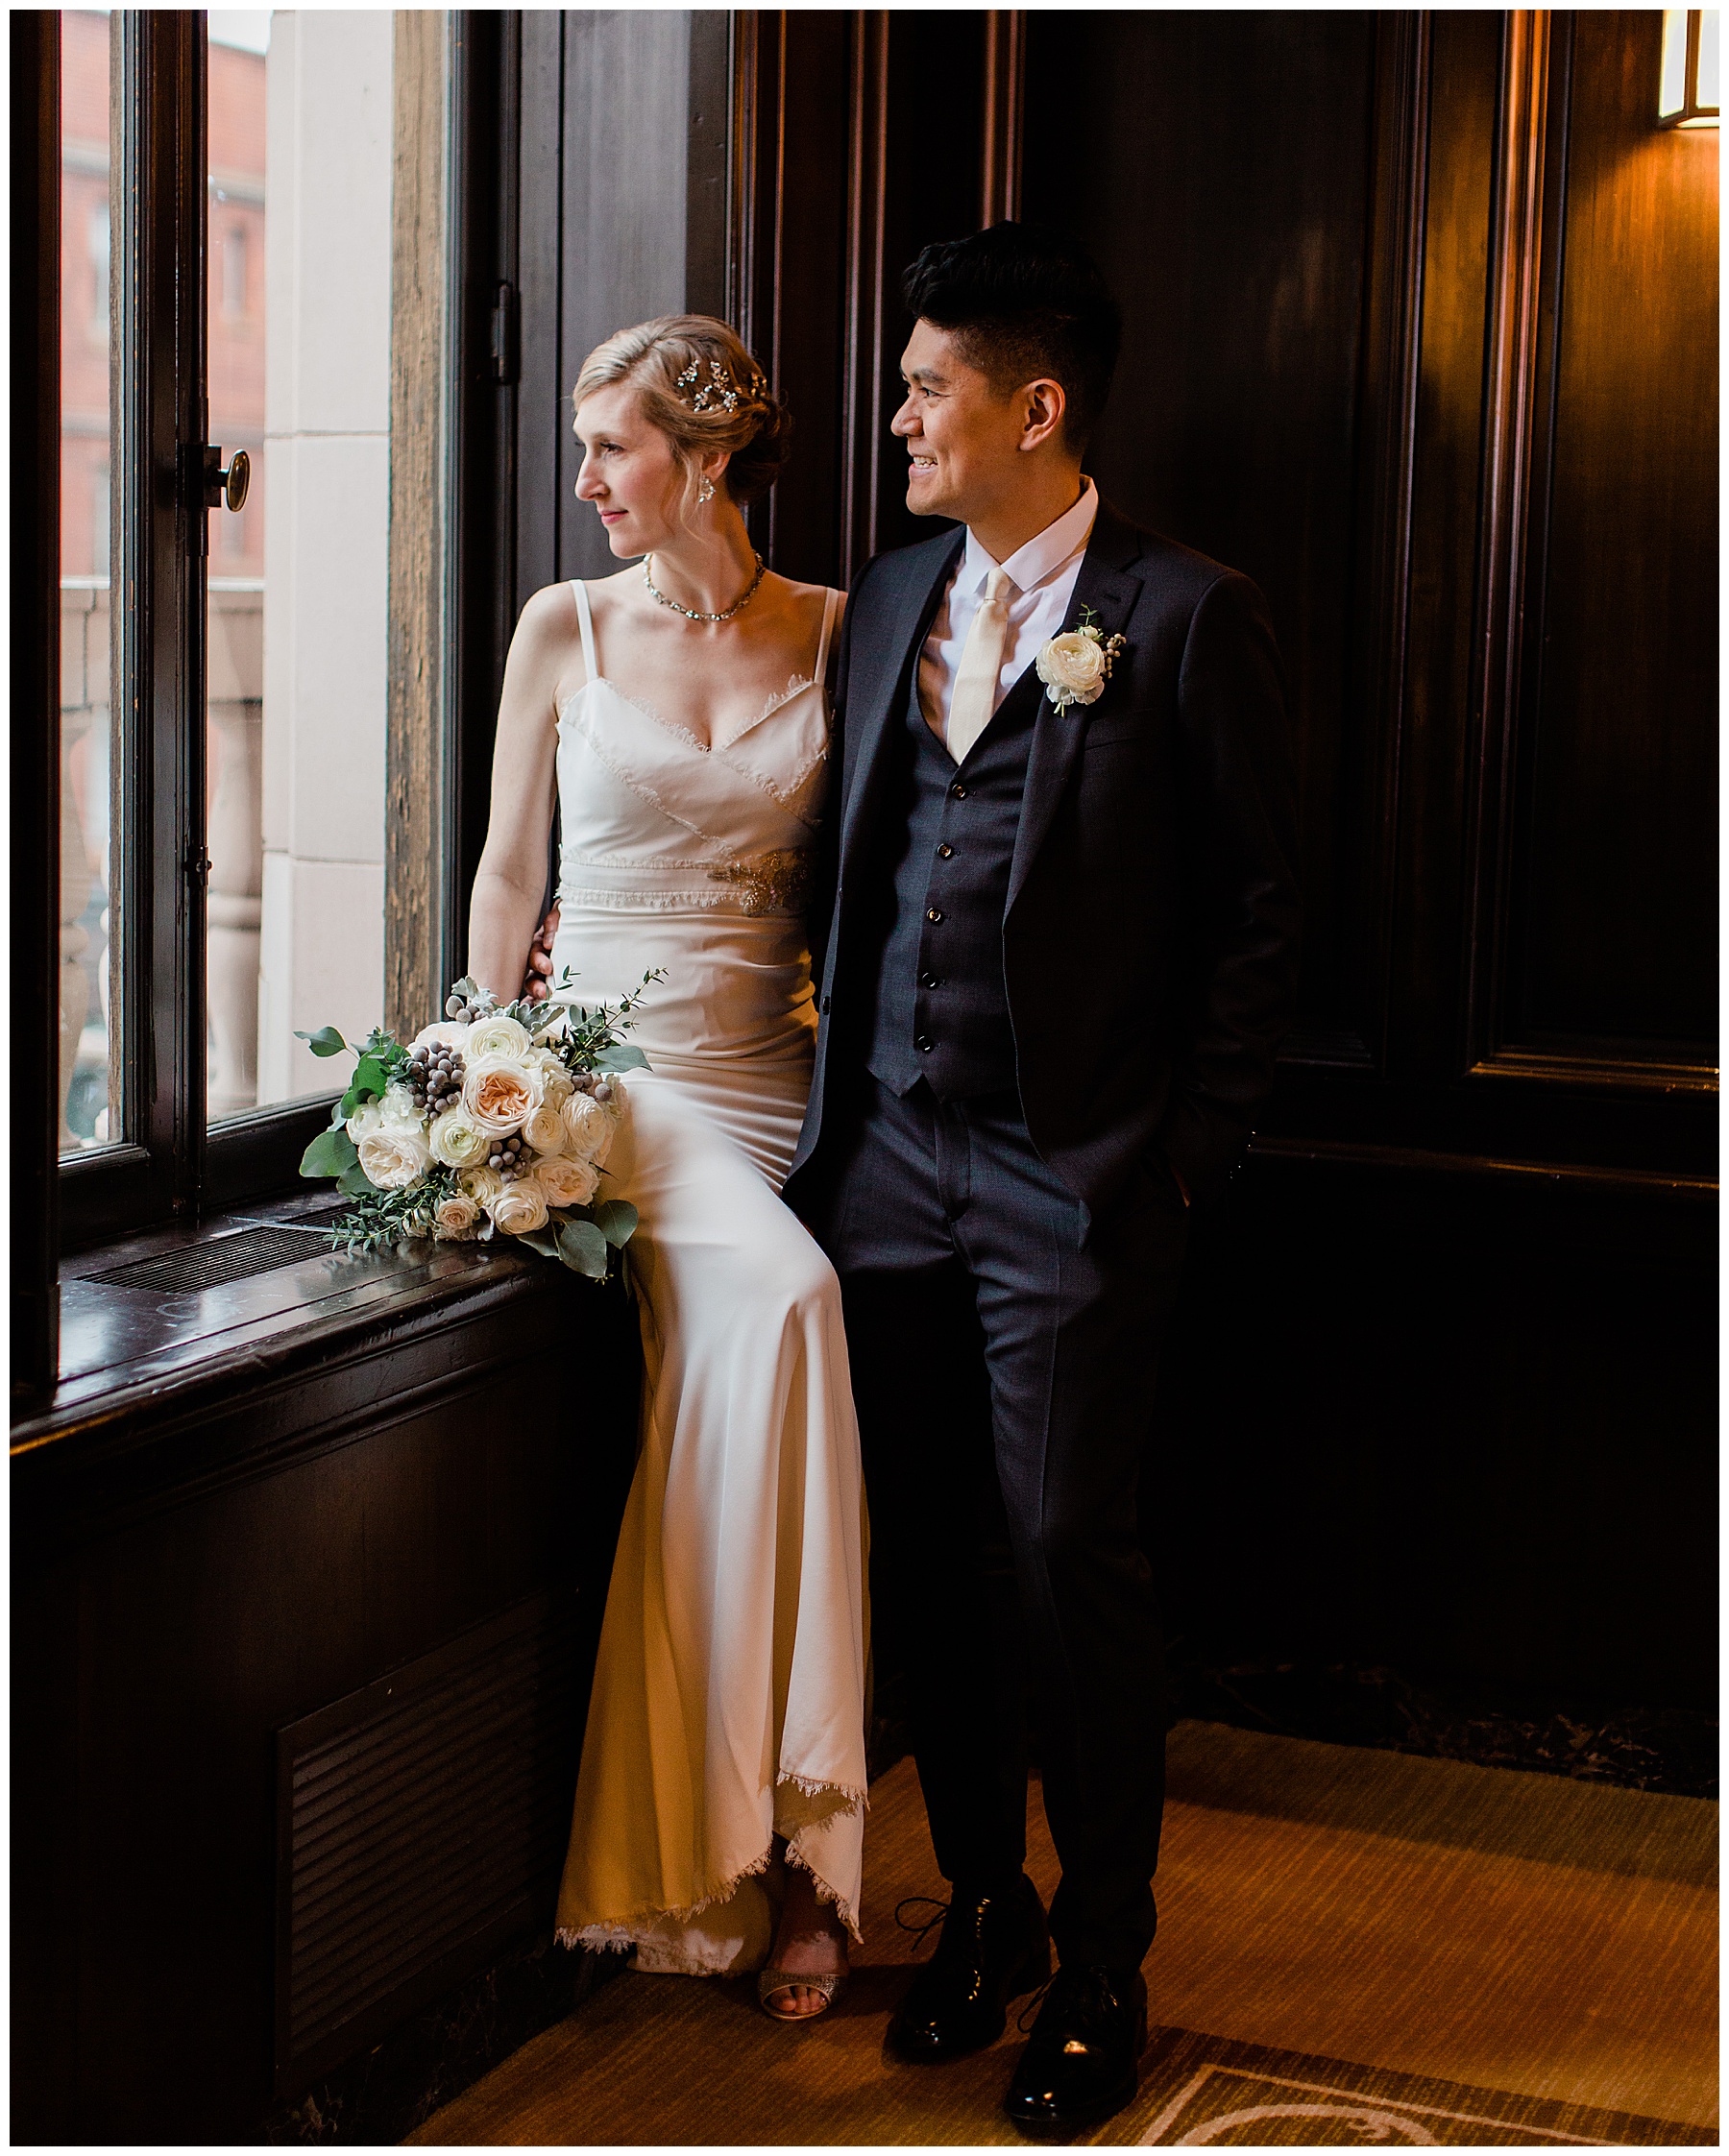 Sentinel Hotel wedding portraits in the beautiful vintage themed lobby.